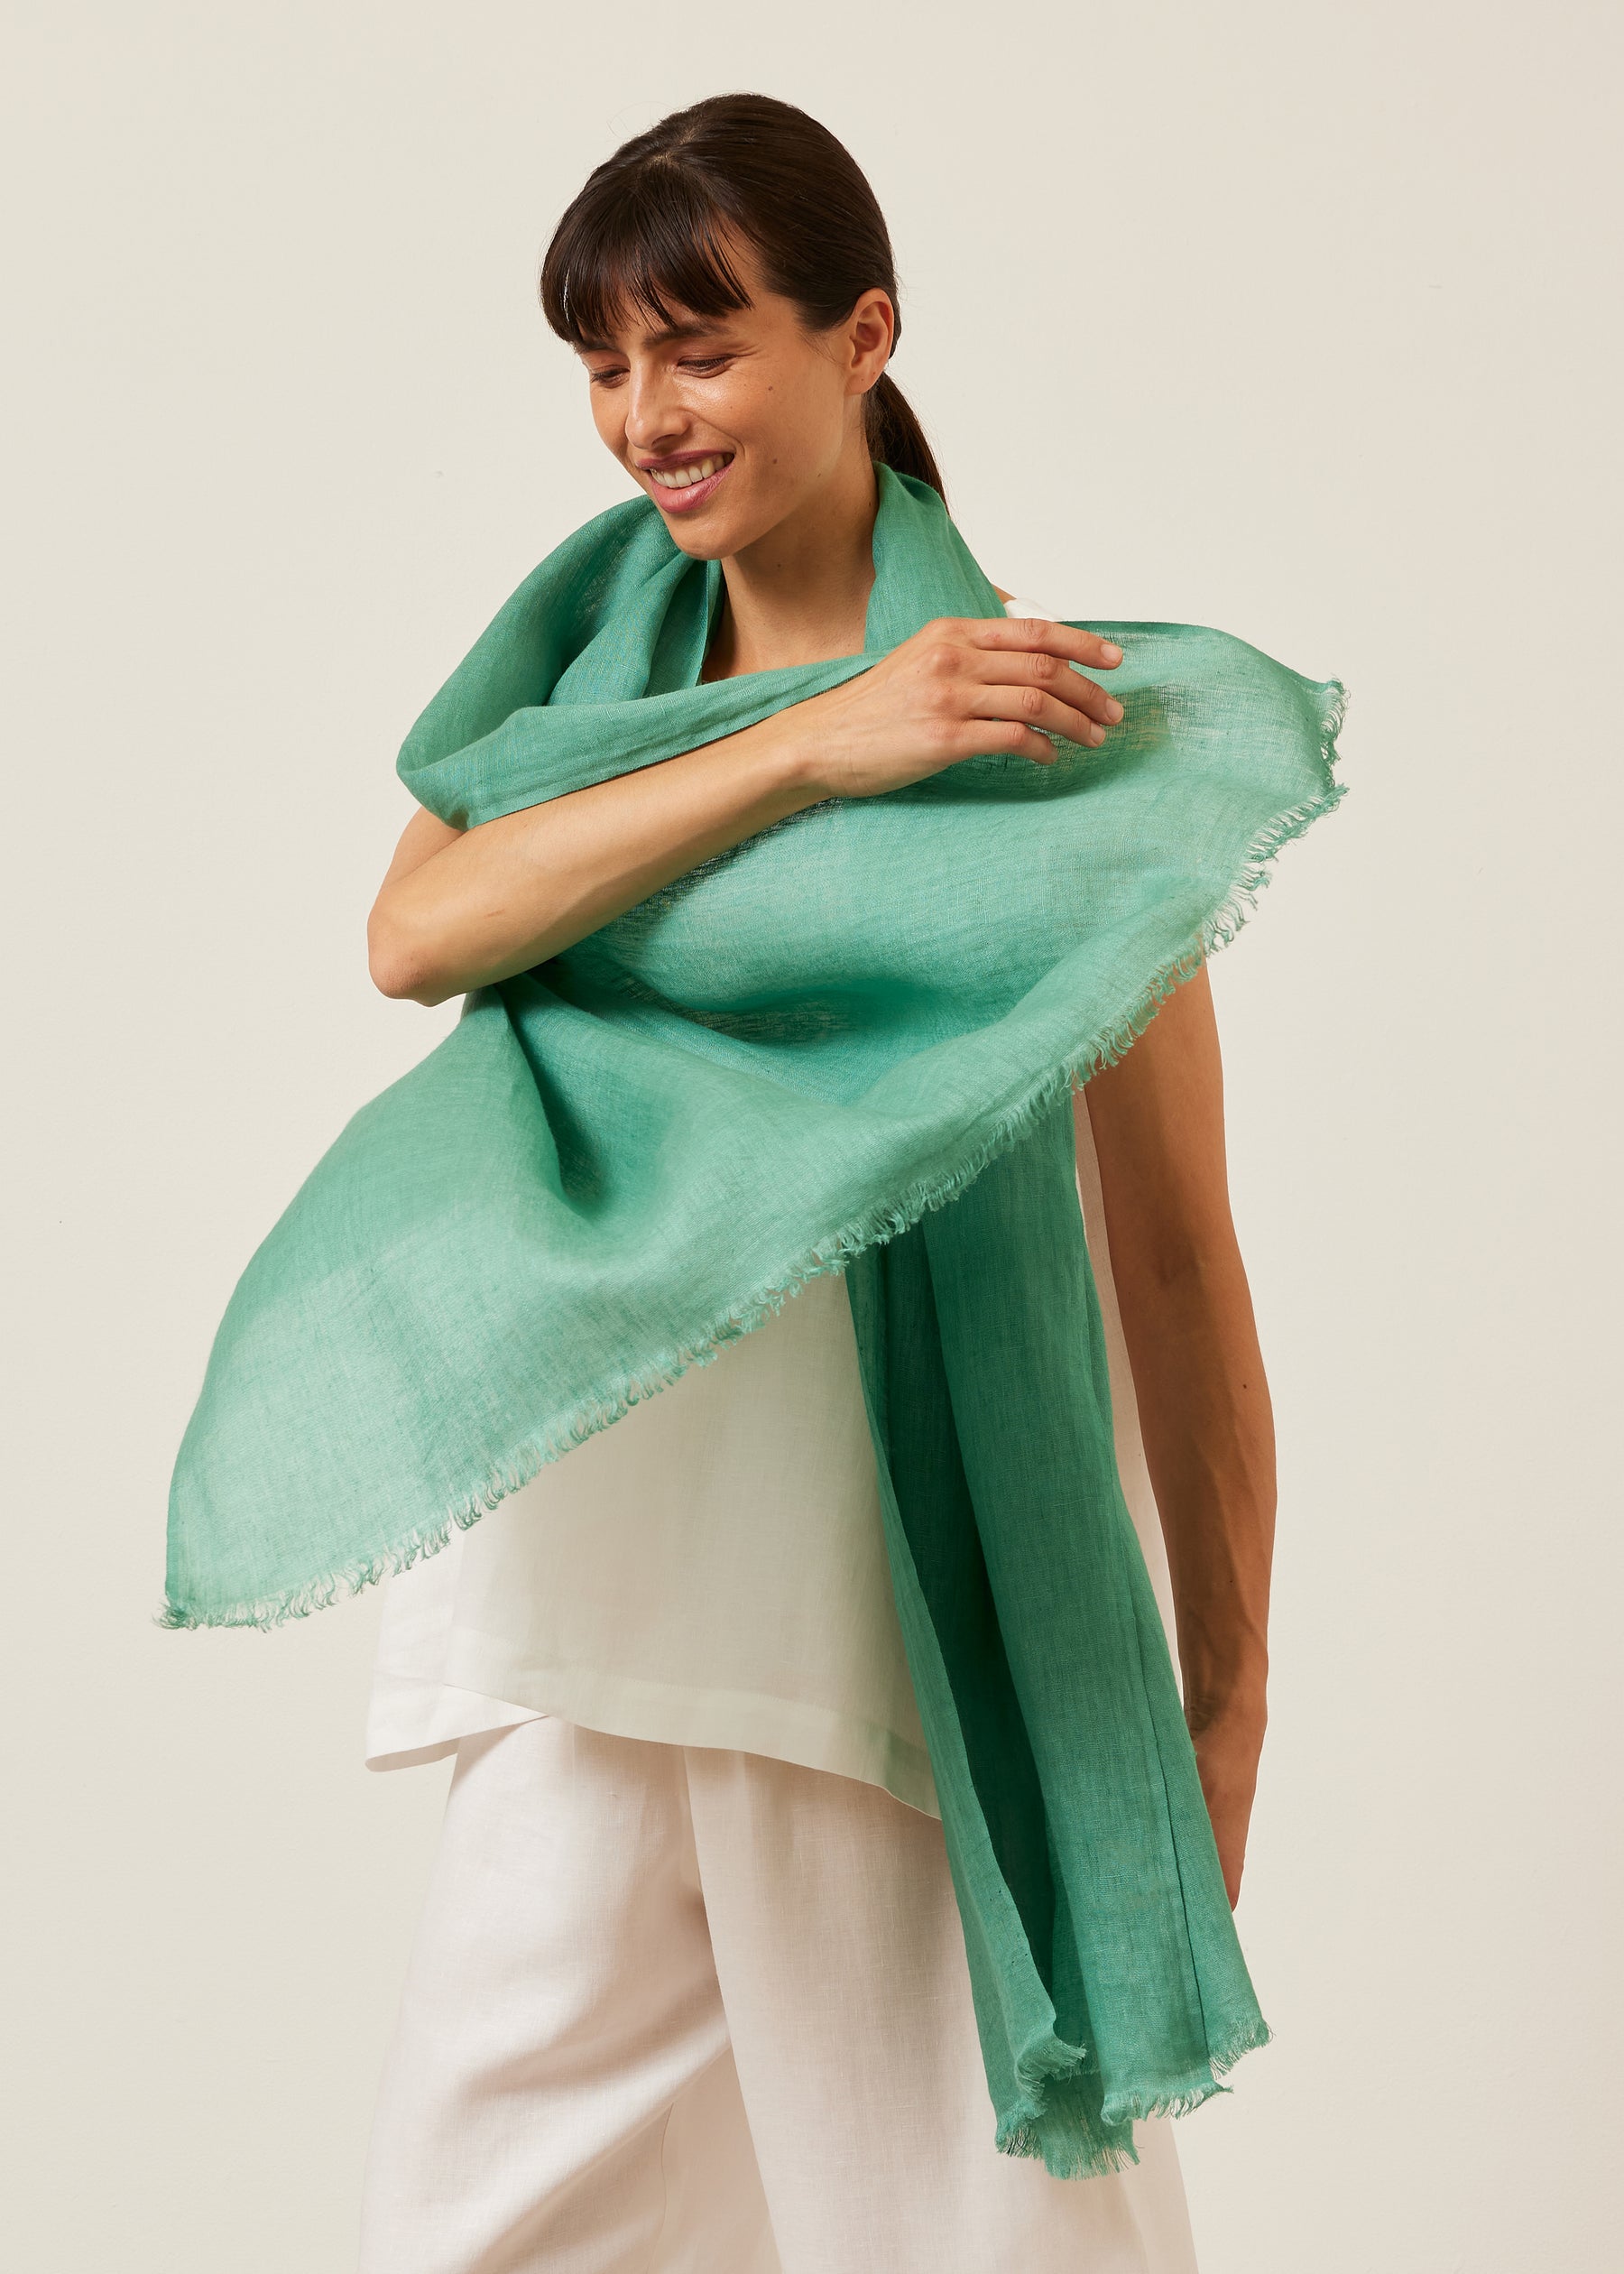 fine large linen scarf with edge detail